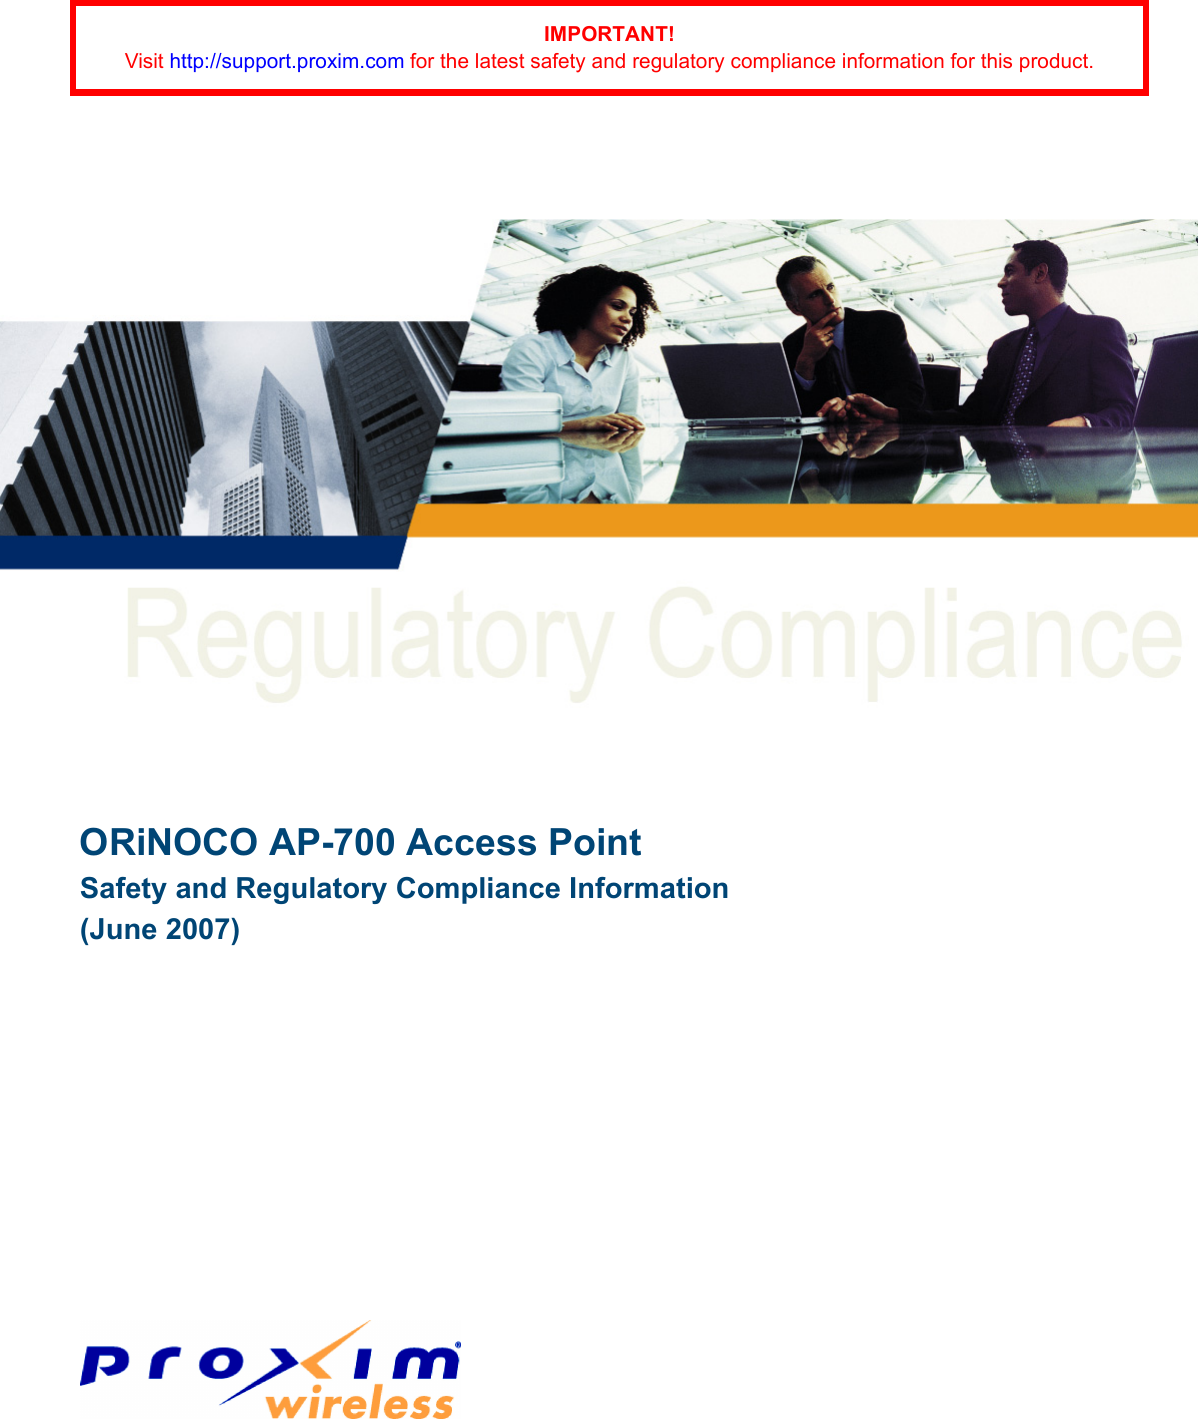 ORiNOCO AP-700 Access PointSafety and Regulatory Compliance Information(June 2007)IMPORTANT!Visit http://support.proxim.com for the latest safety and regulatory compliance information for this product.